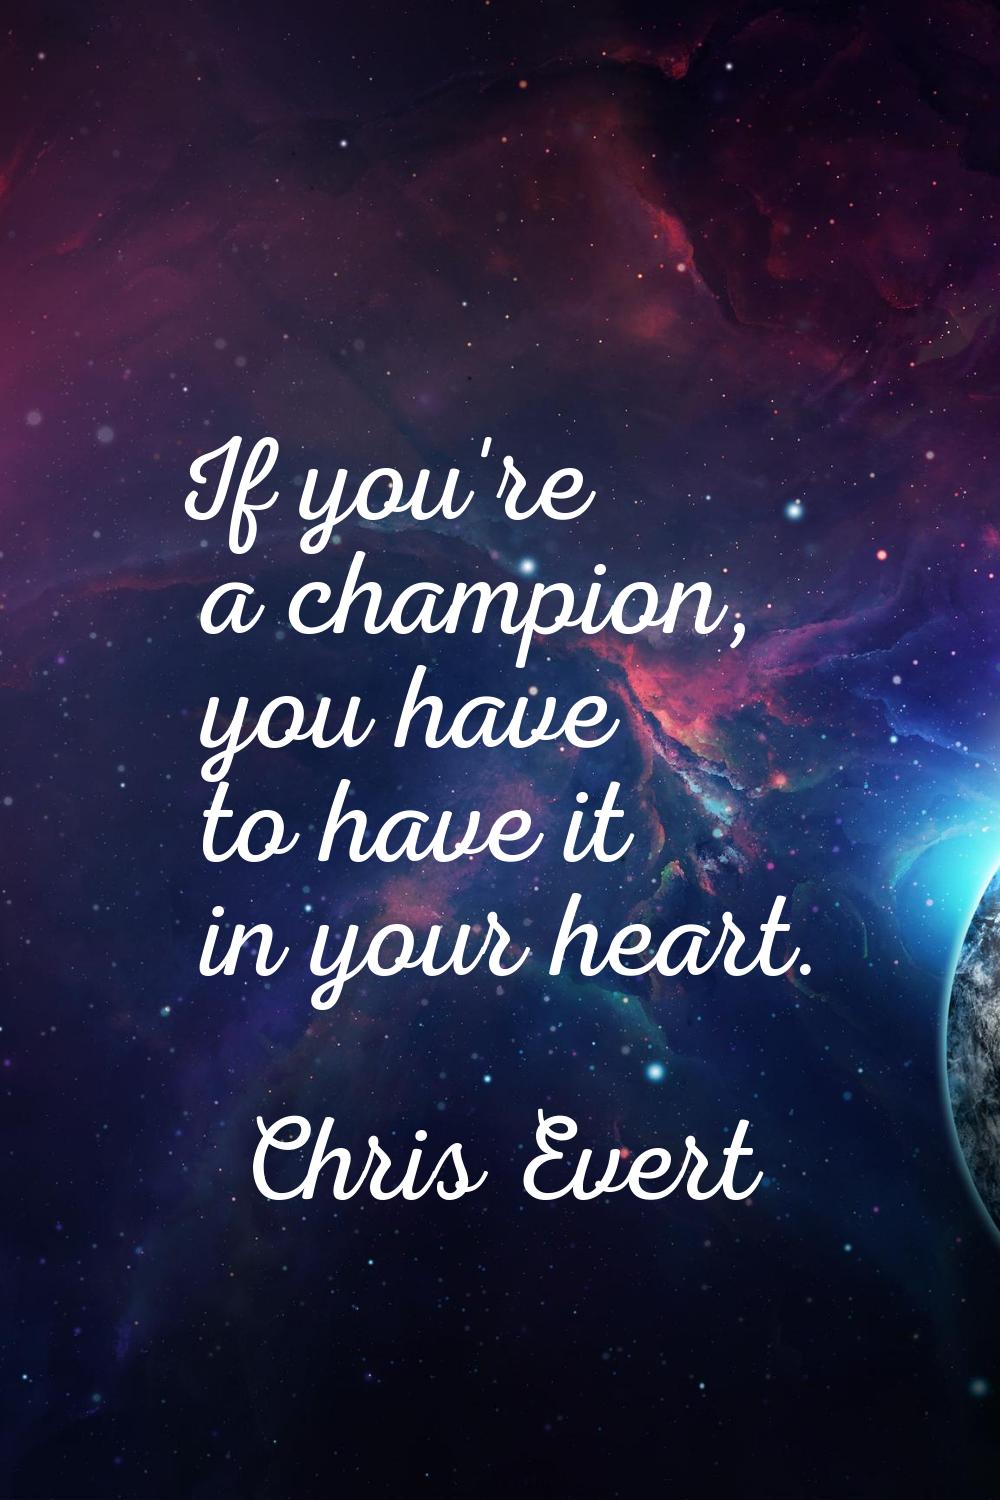 If you're a champion, you have to have it in your heart.